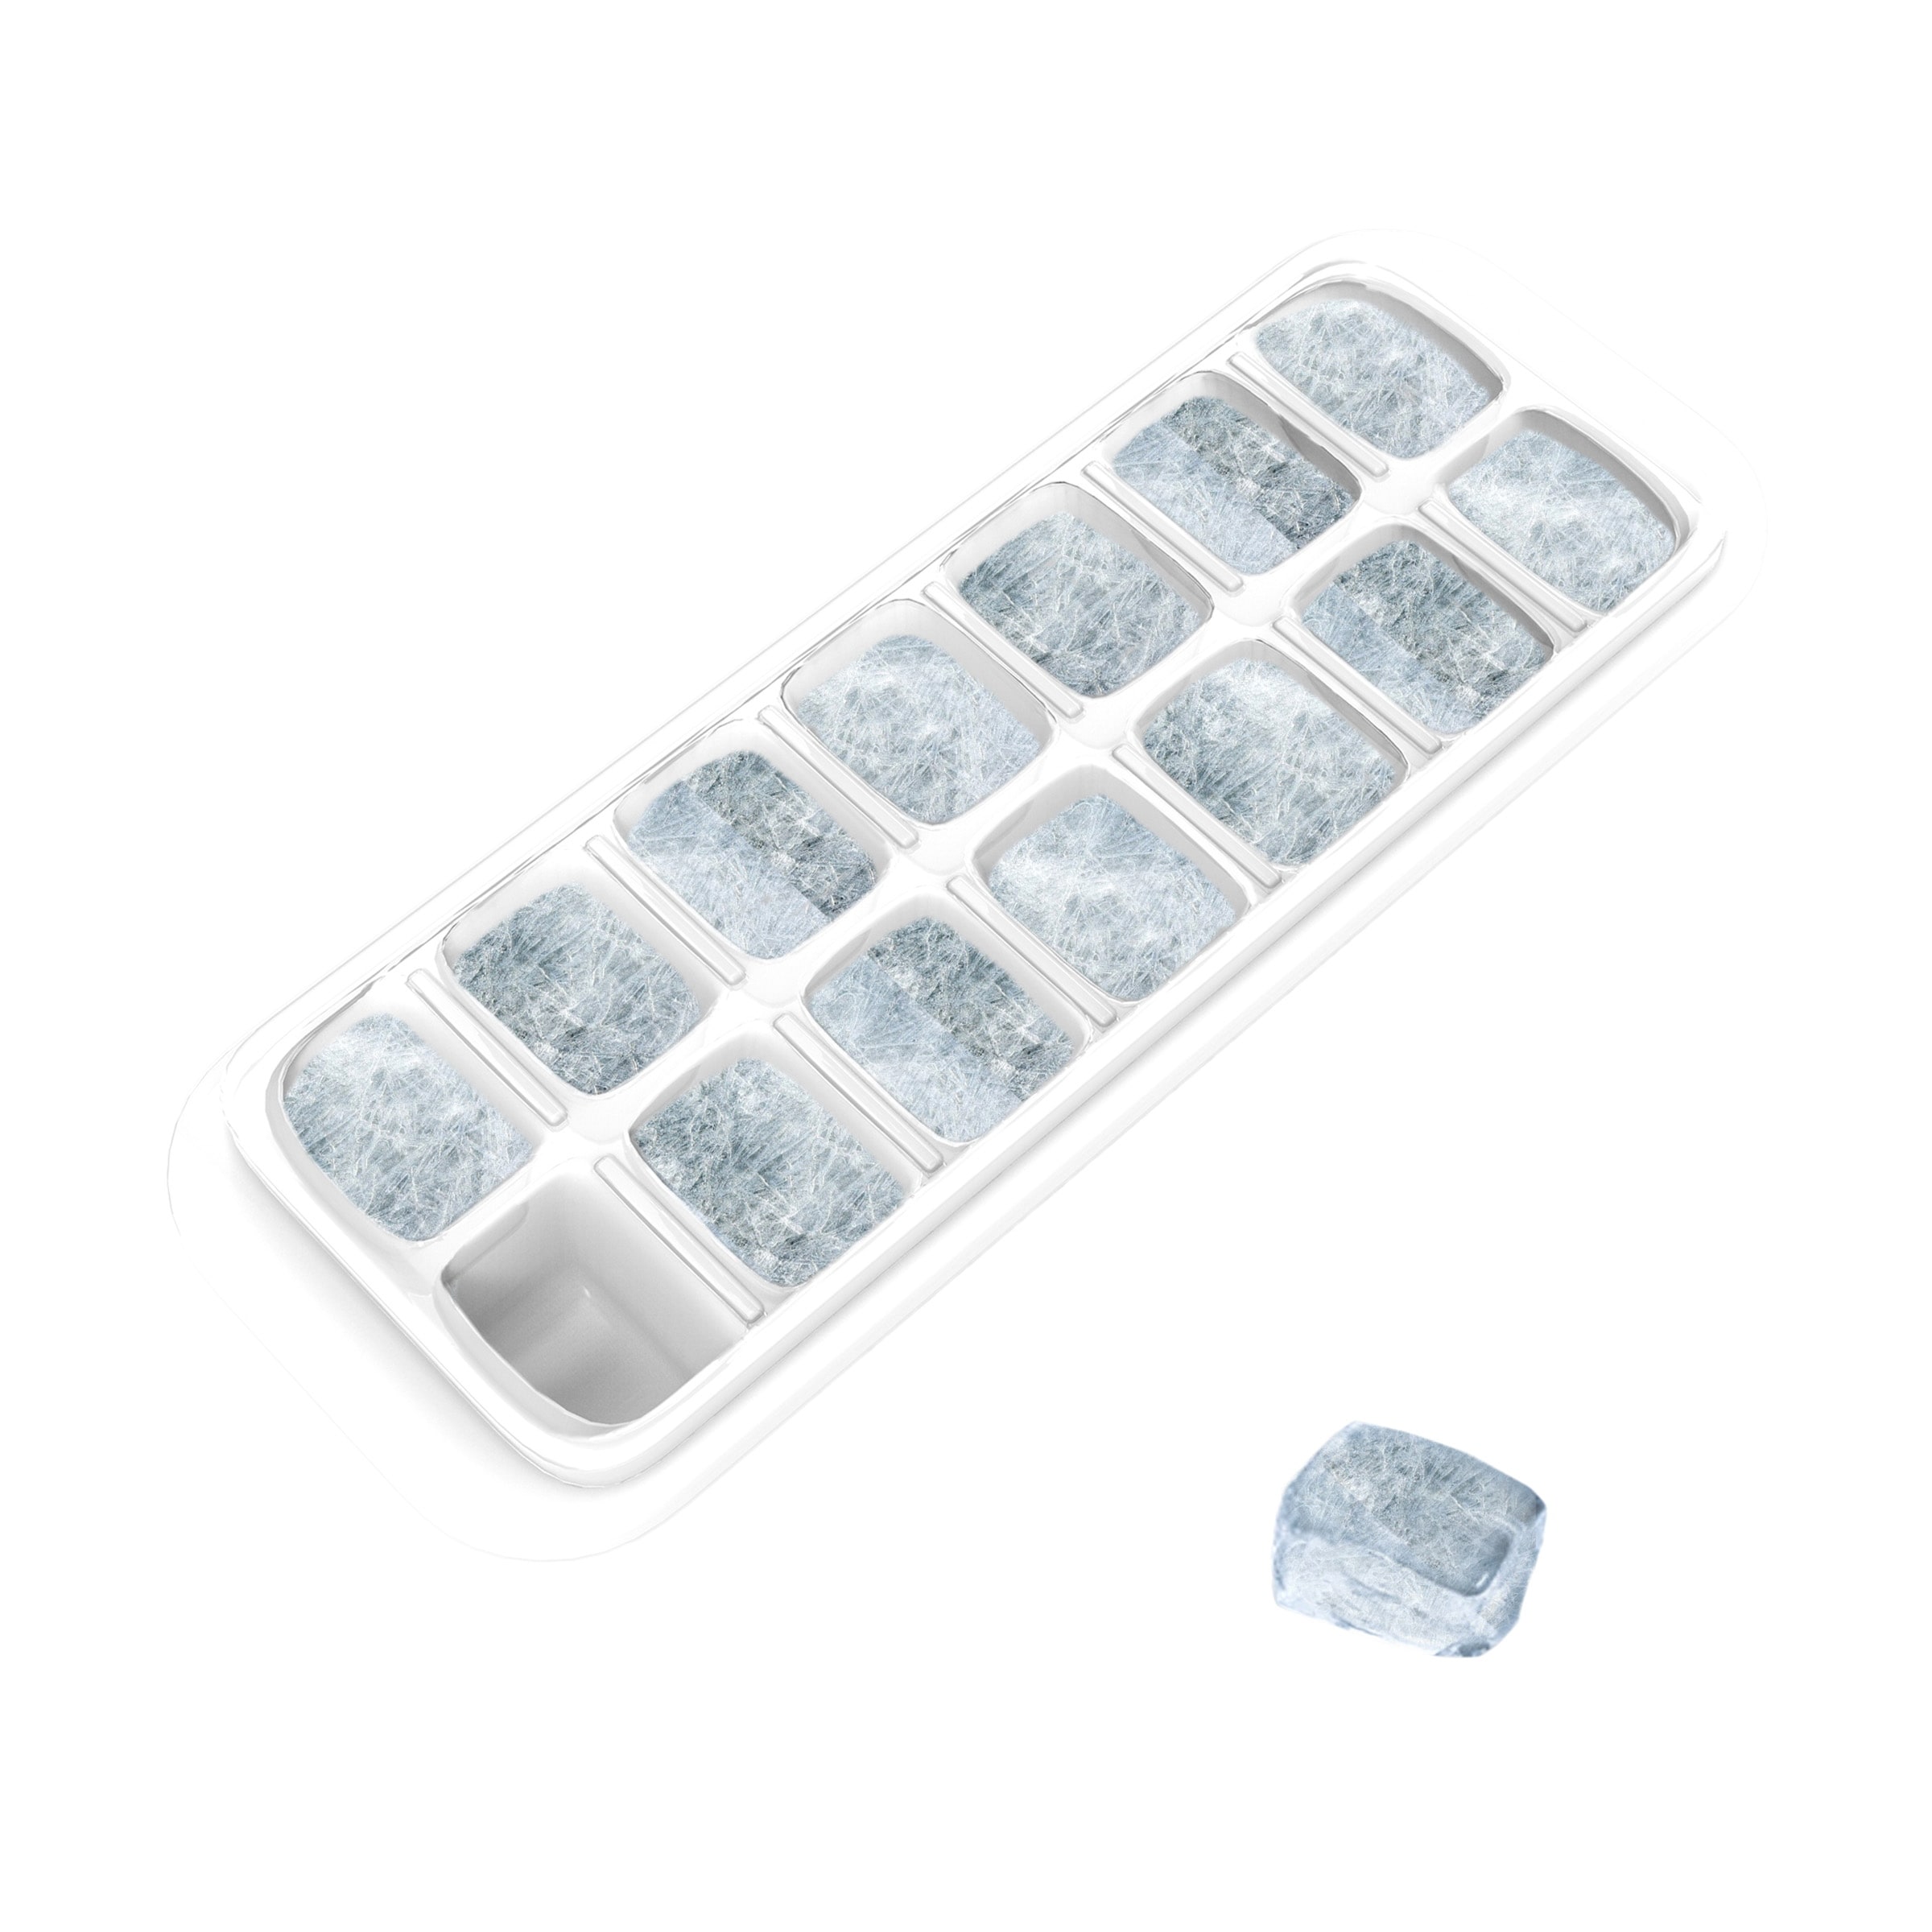 https://ak1.ostkcdn.com/images/products/is/images/direct/97b6ed21028b716aeace25769b739bb9c4f5ccf1/Set-of-2-Ice-Cube-Trays---14-Cube-Spill-Resistant%2C-Easy-to-Fill-Trays-with-Lids-by-Chef-Buddy-%28Multicolor%29.jpg